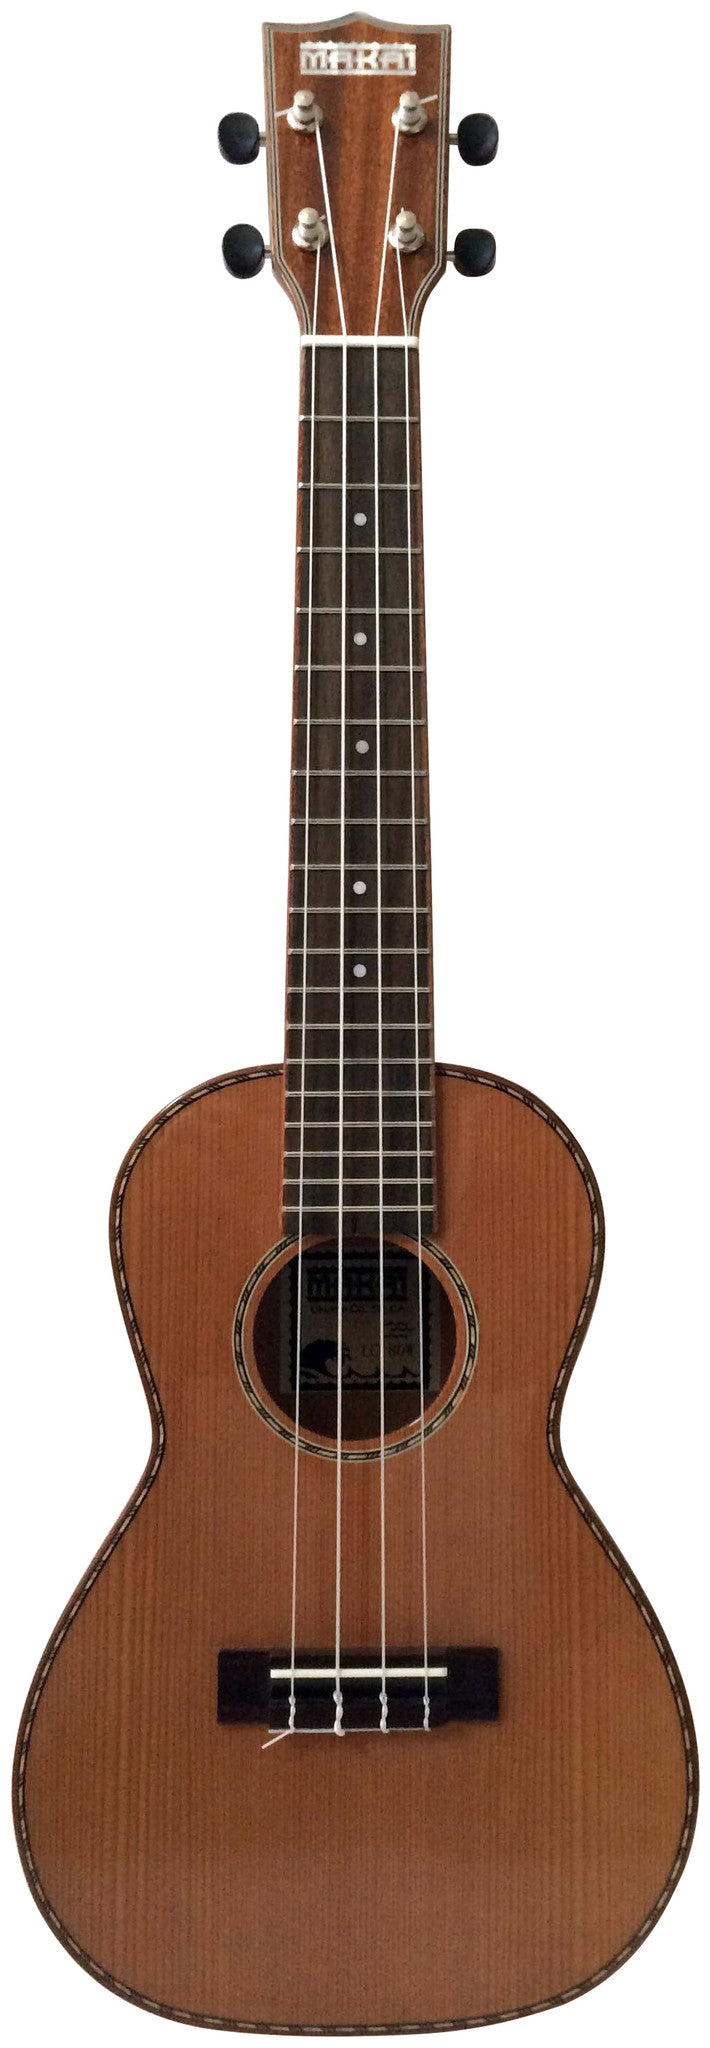 Makai Limited Solid Cedar Willow Concert Ukulele LC-80W